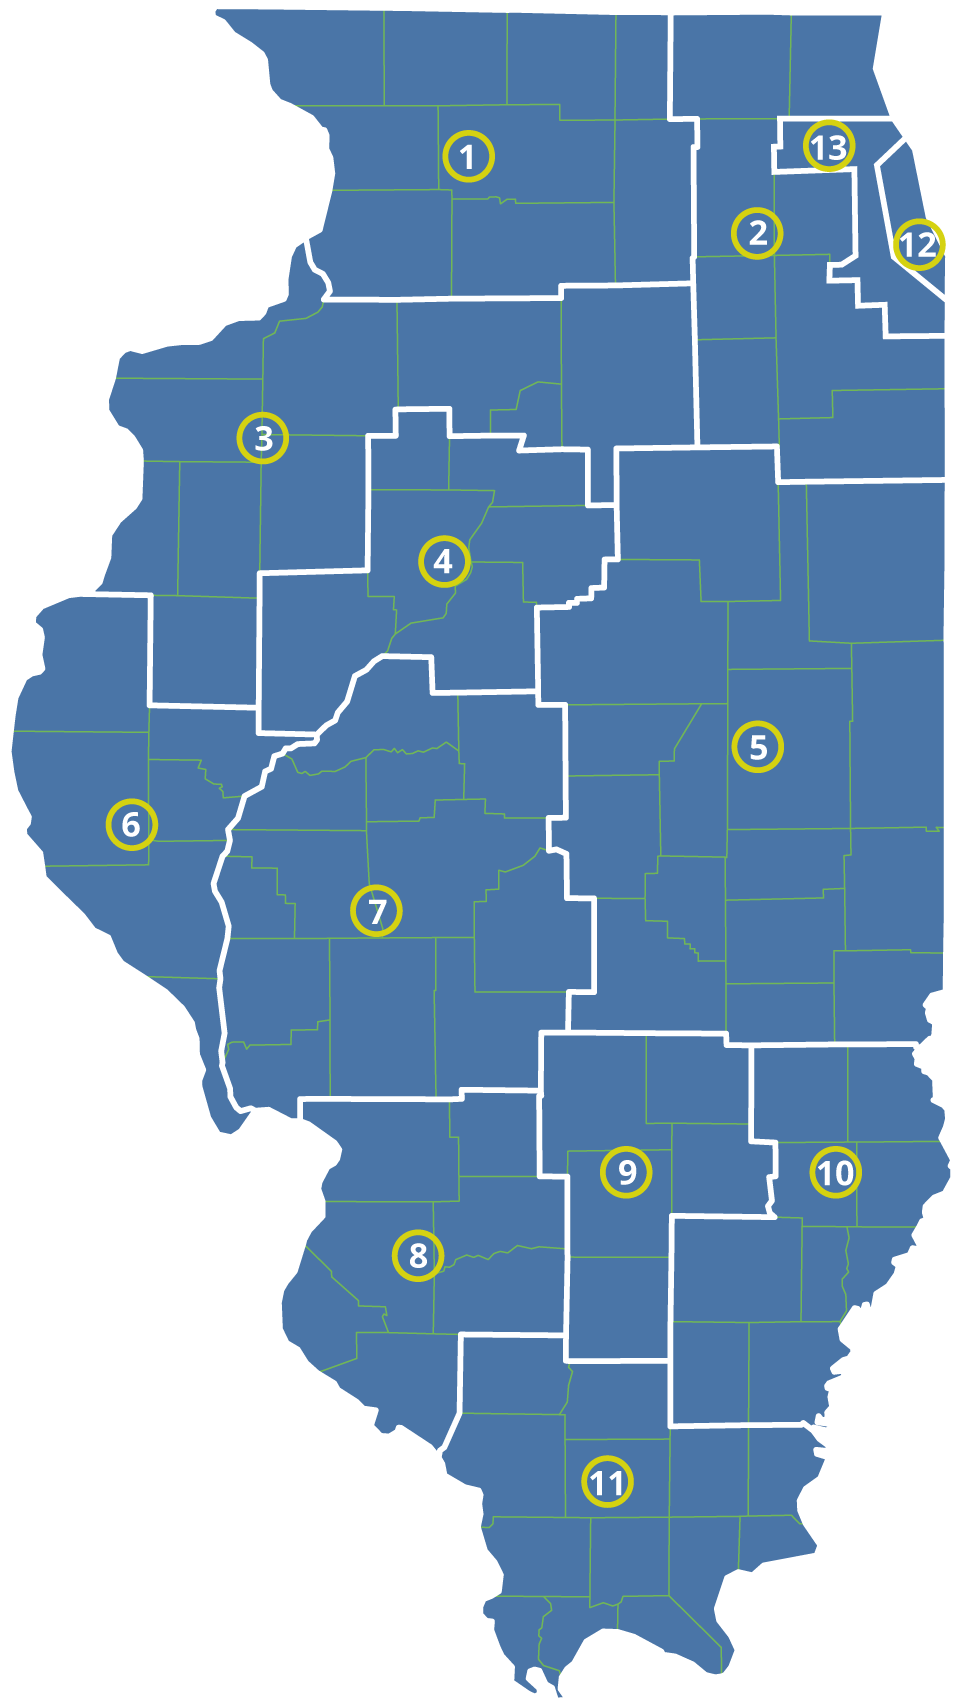 Illinois Planning and Service Areas